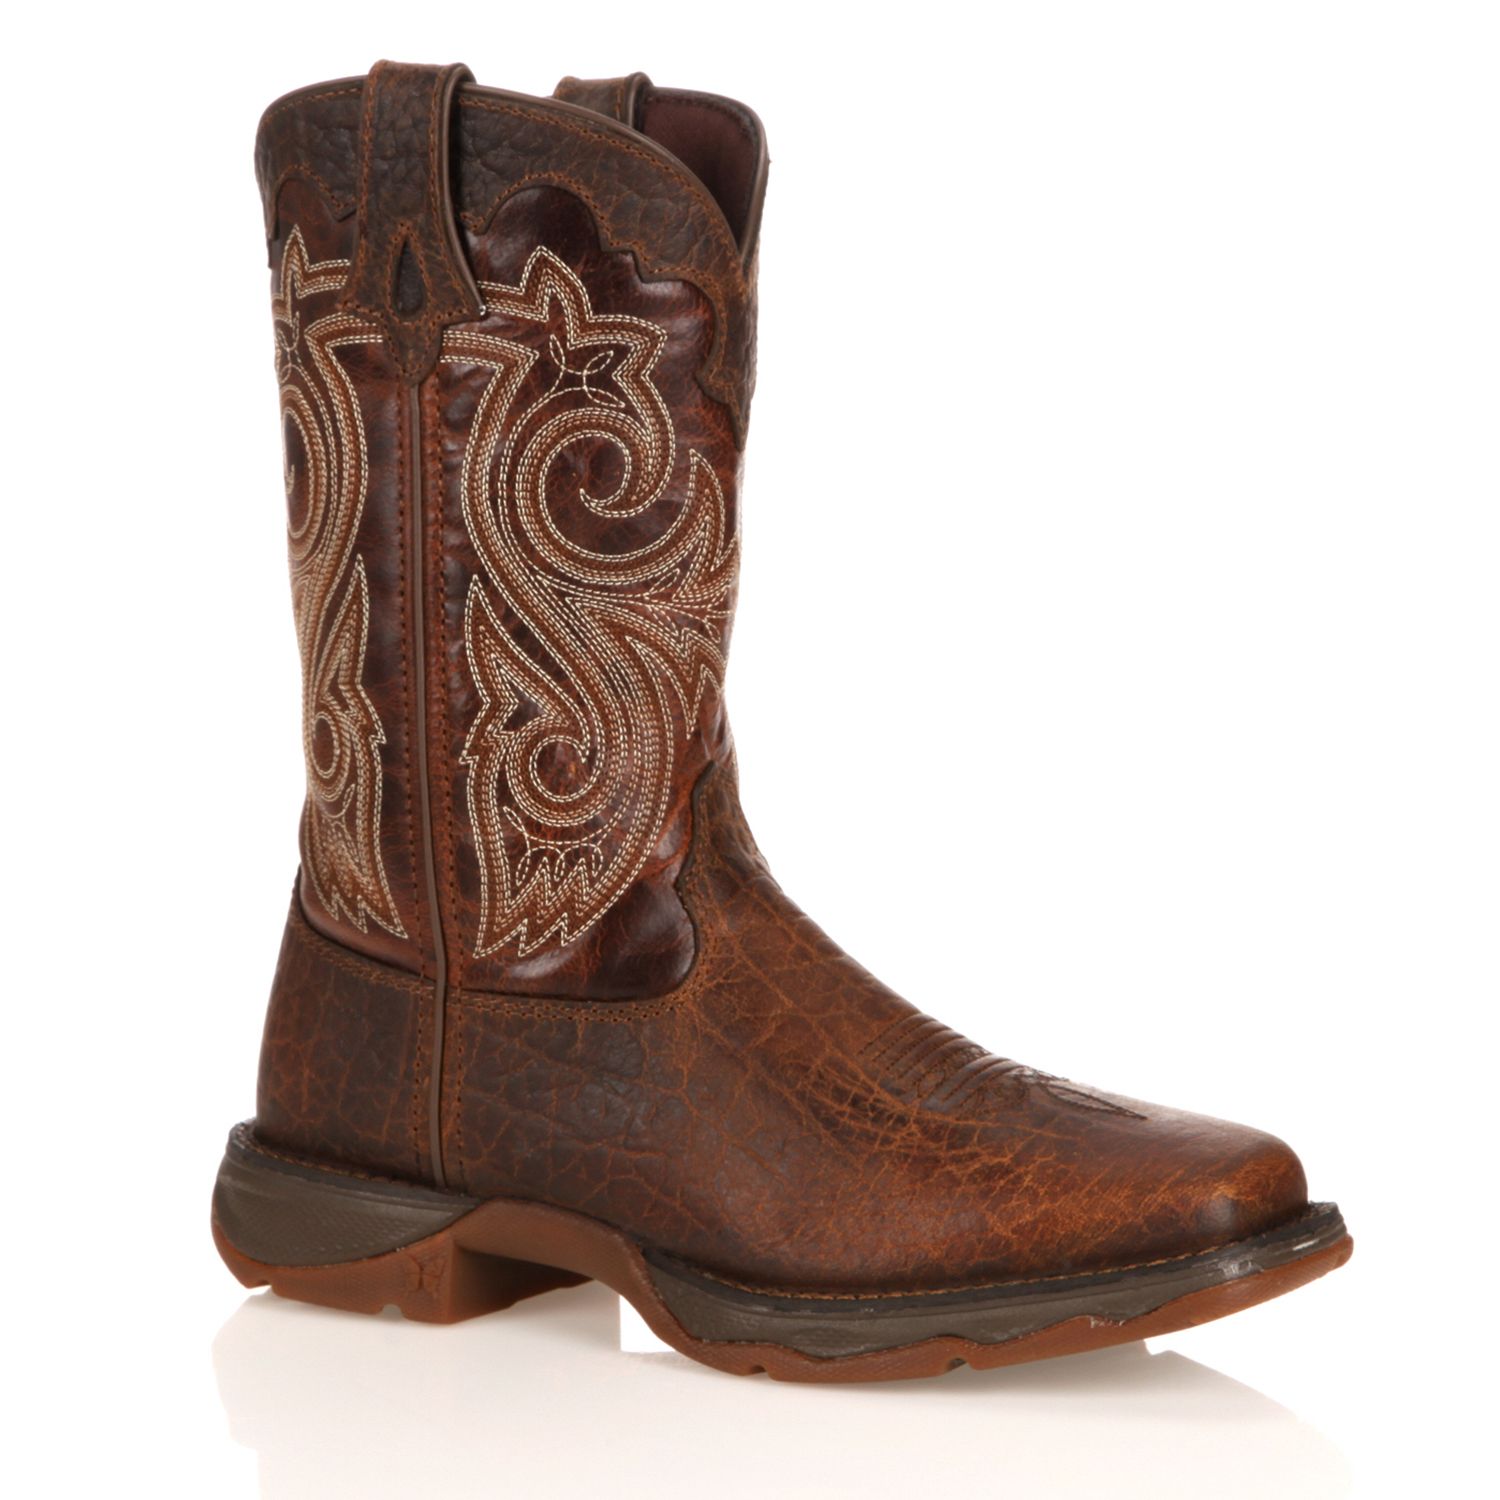 Image for Durango Lady Rebel Women's Steel-Toe Cowboy Boots at Kohl's.